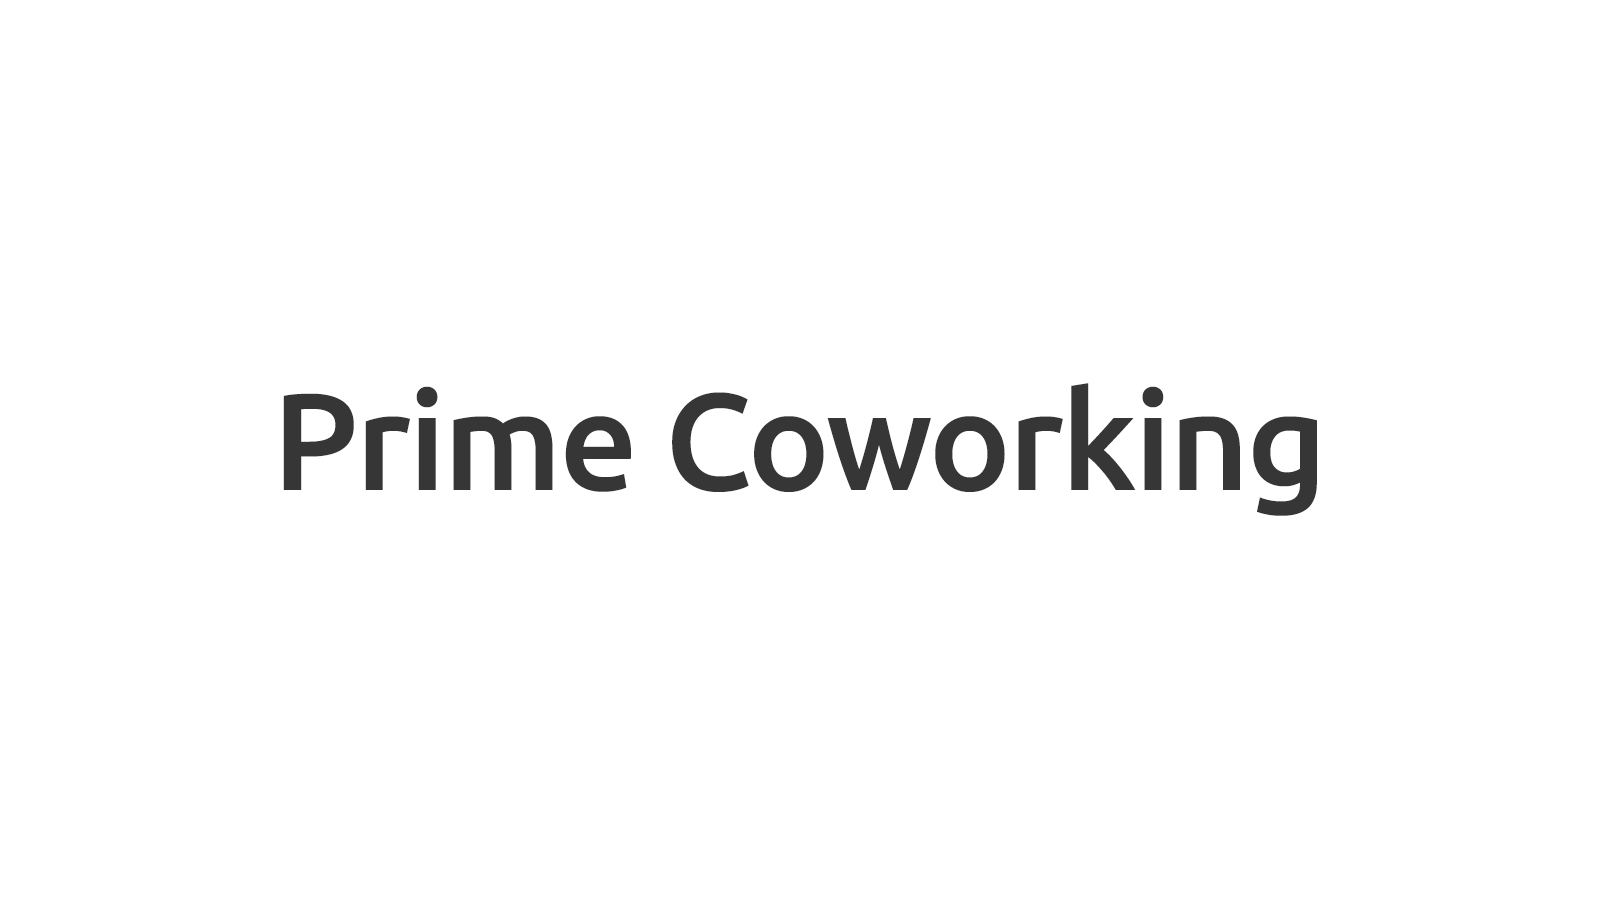 Prime Coworking